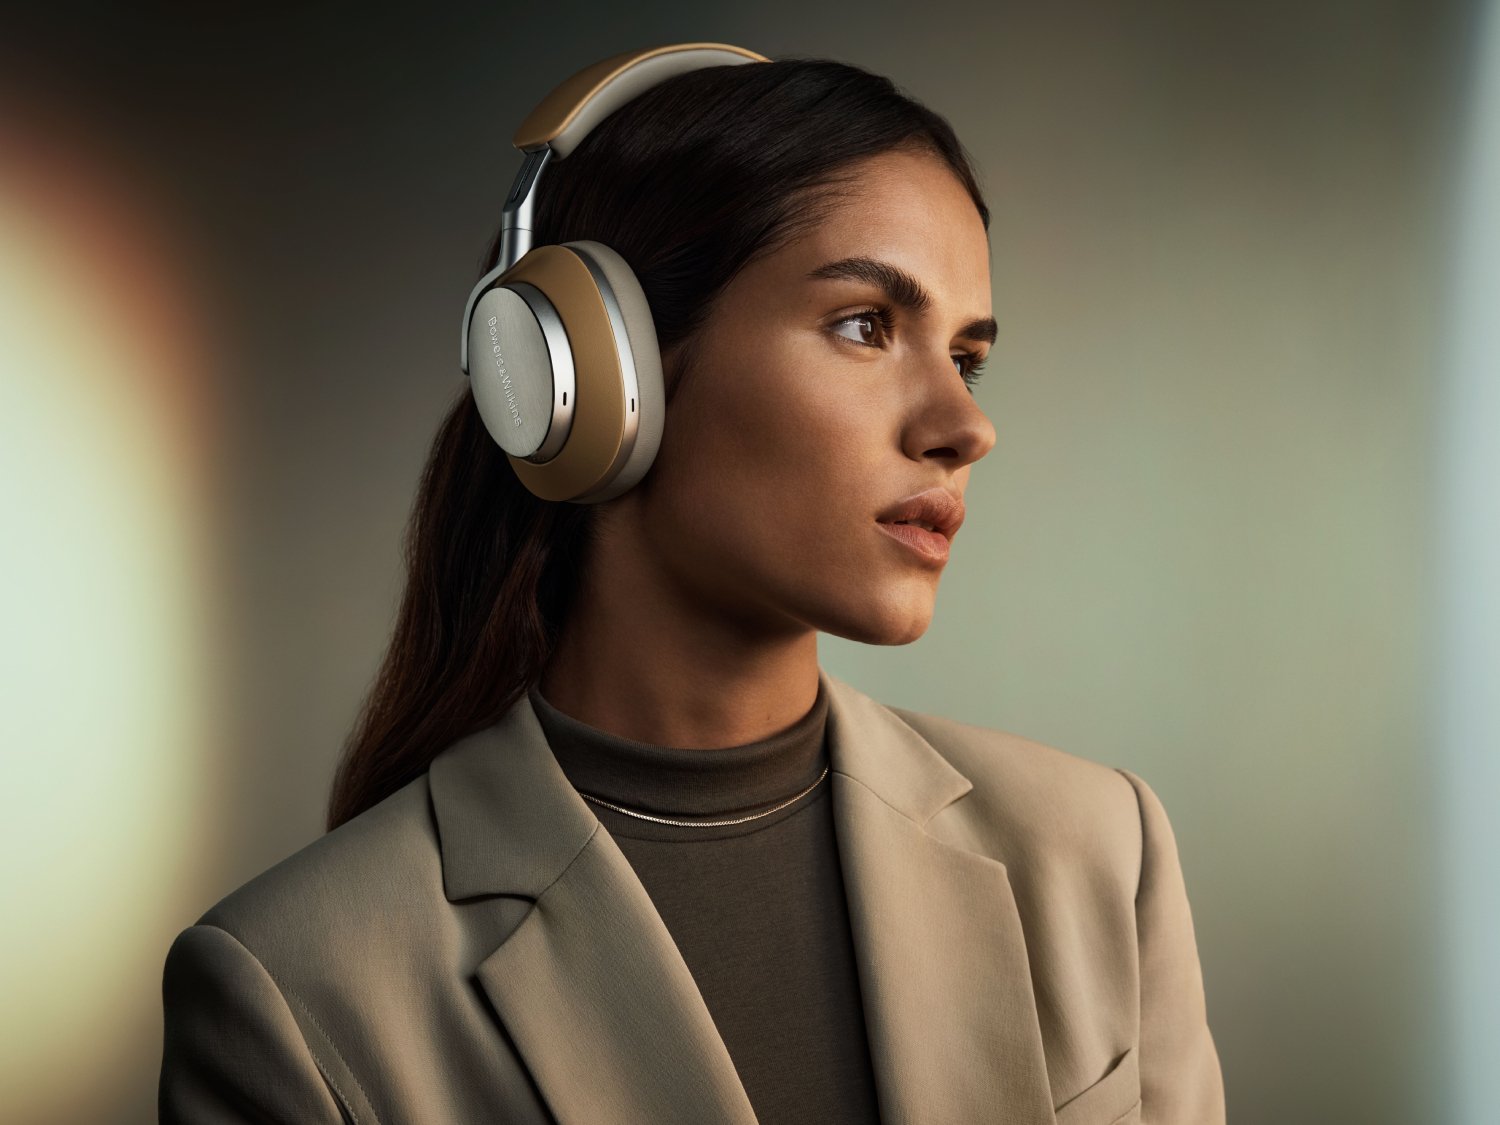 Bowers & Wilkins Px8 Over-Ear Wireless Noise Cancelling